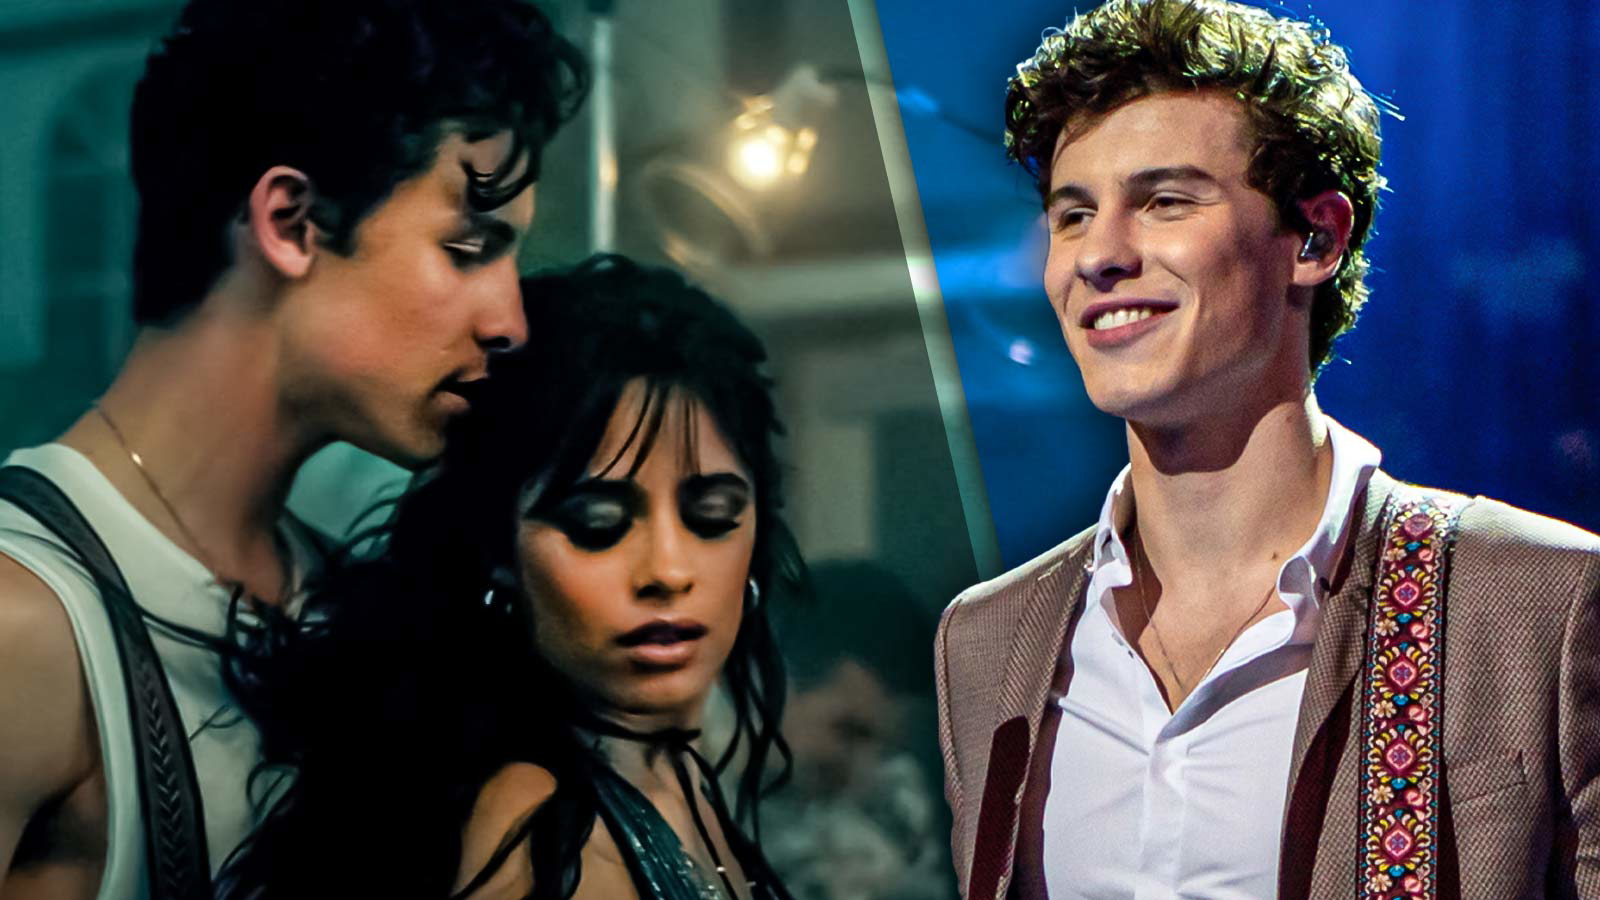 “Don’t love that so many people…”: Camila Cabello Doesn’t Want To Be Known For Her Super-hit Song ‘Señorita,’ with Ex Shawn Mendes, For One Understandable Reason